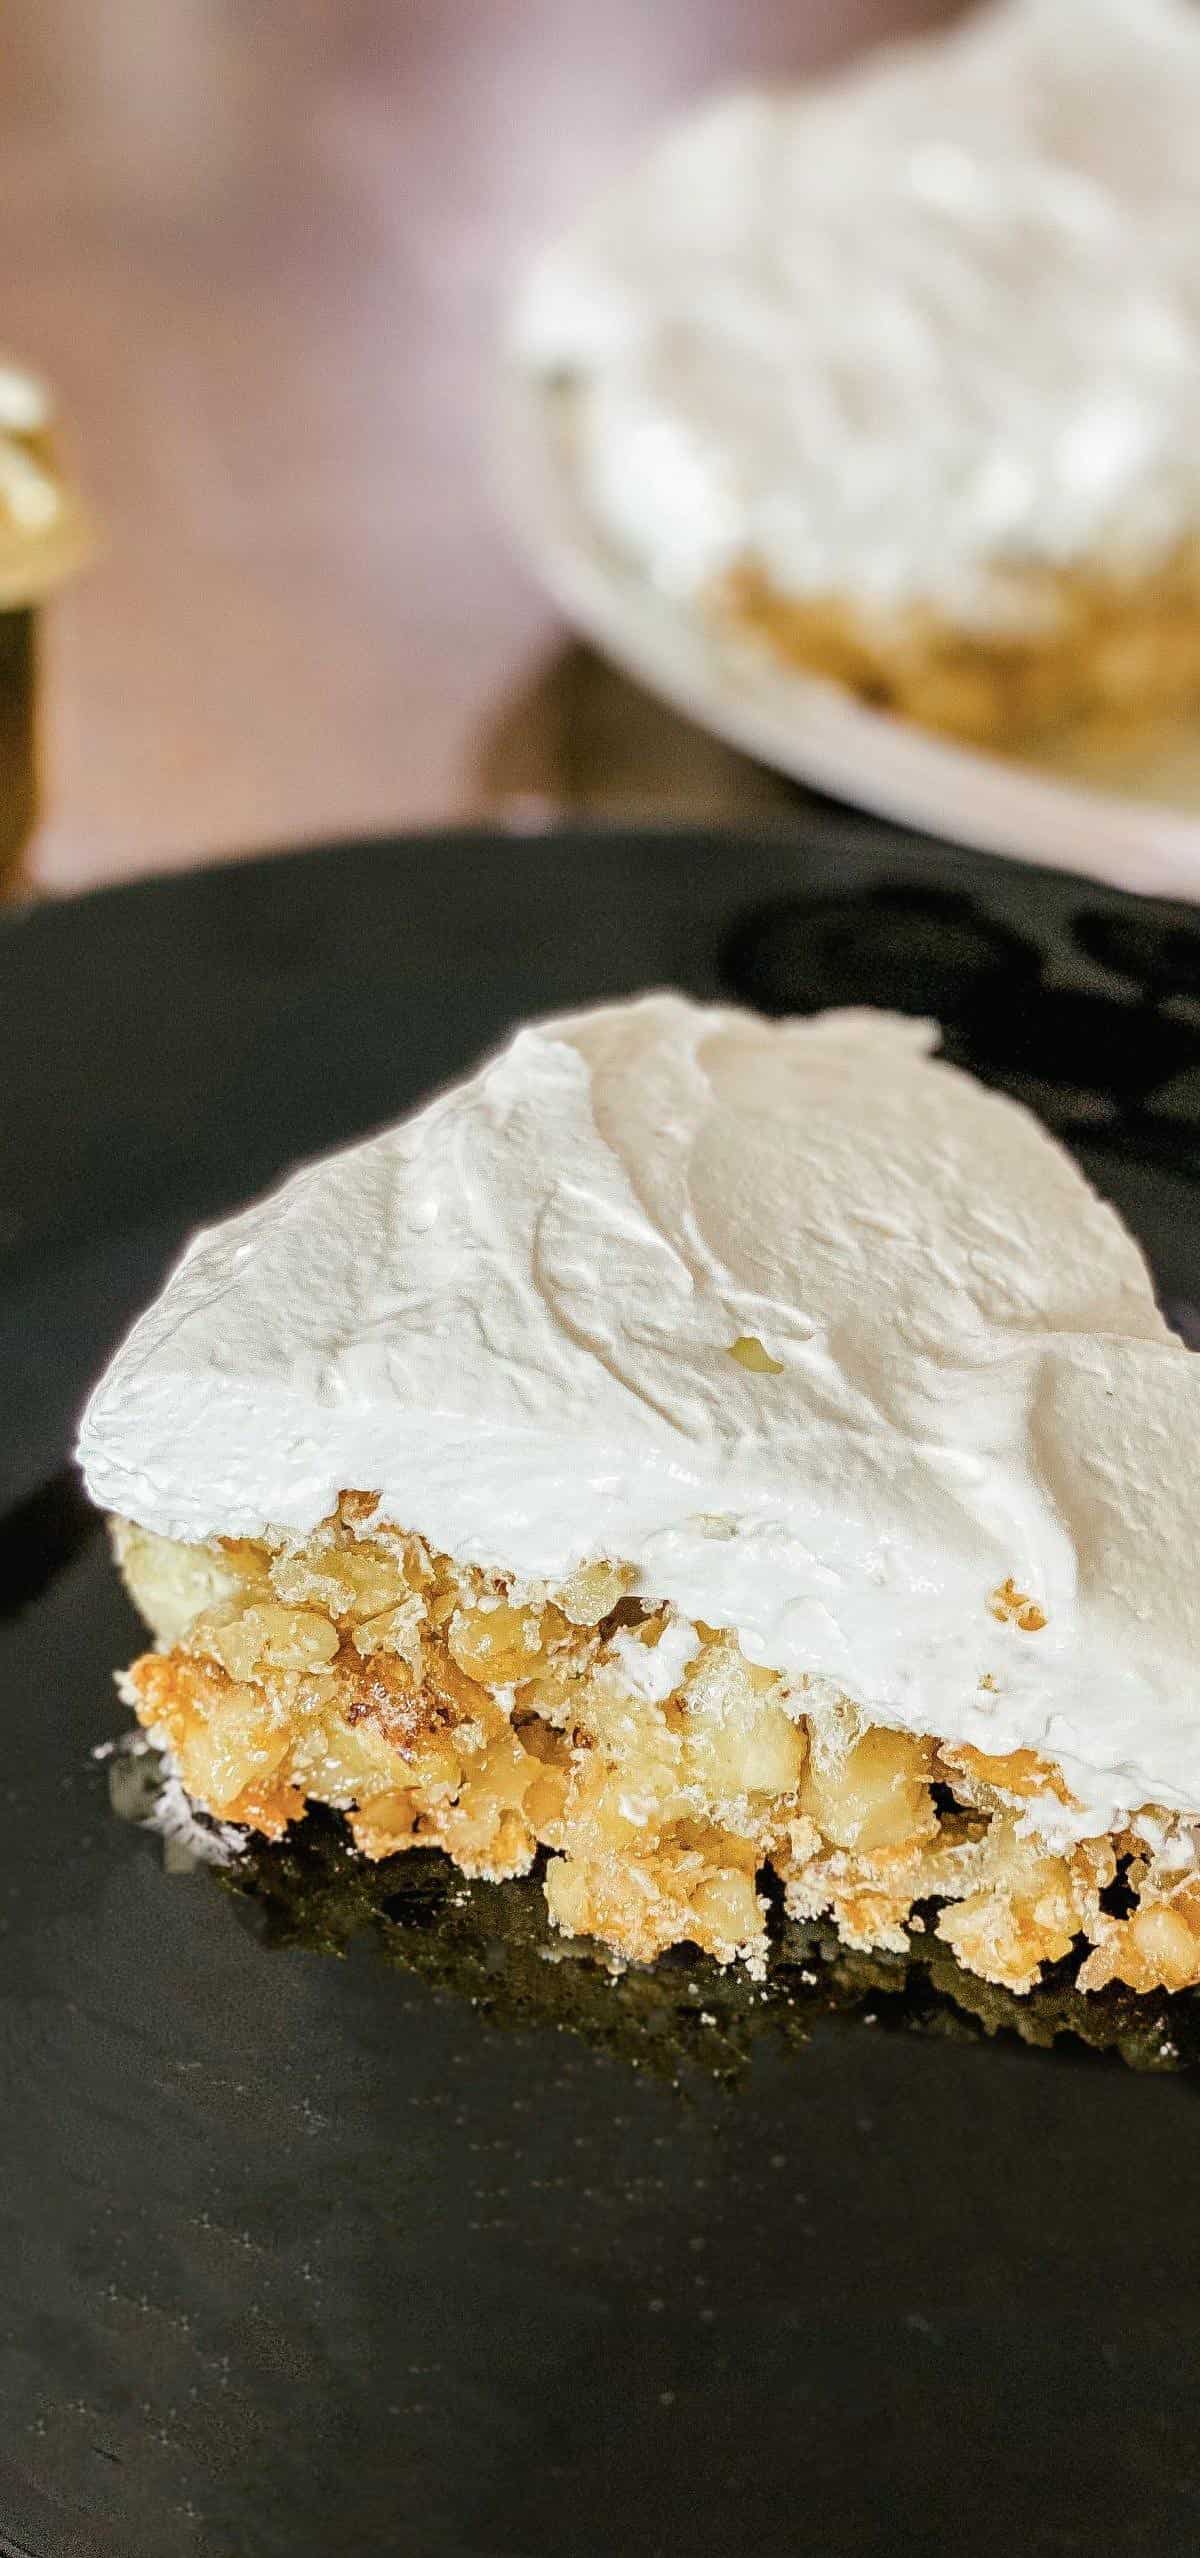  There's nothing quite like the taste of nostalgia, and this pie is a sweet trip down memory lane.